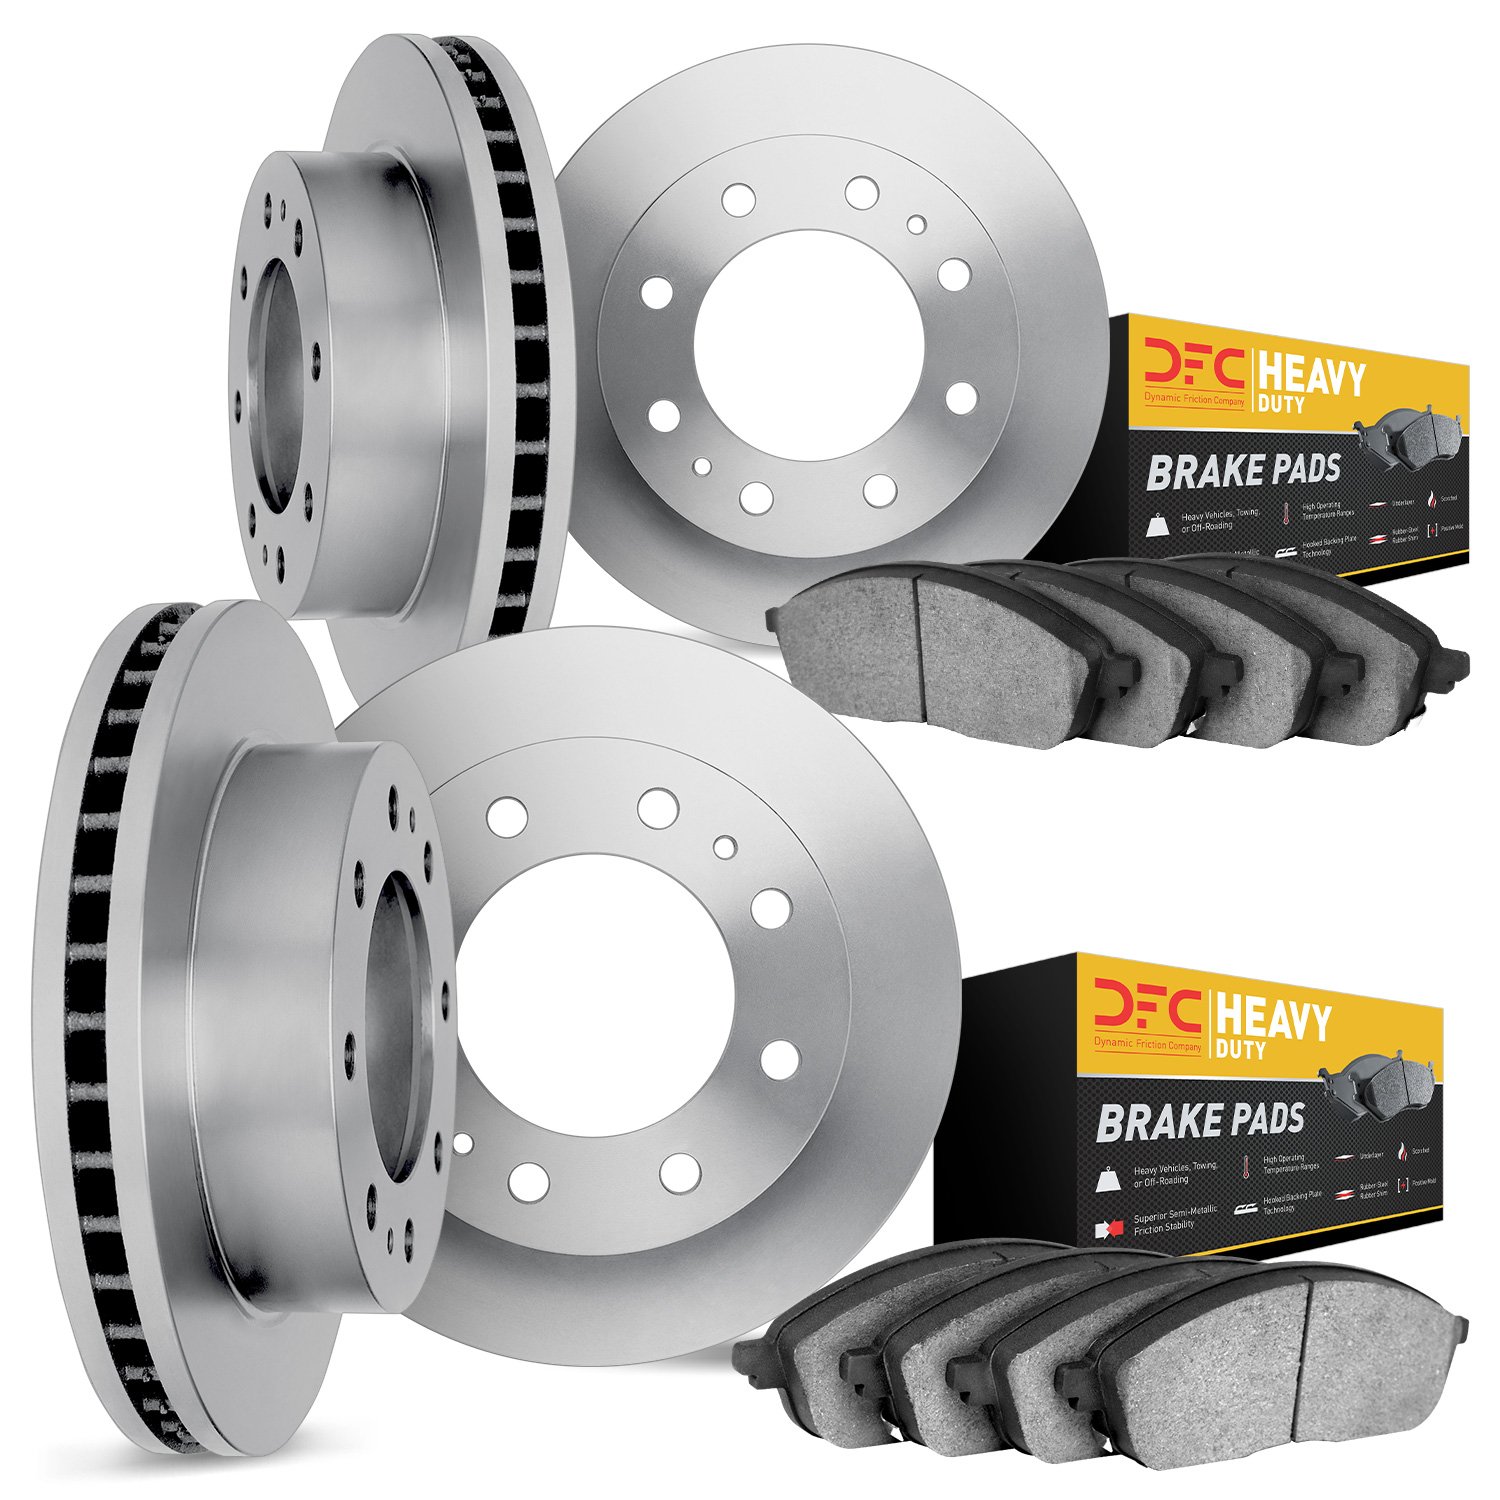 6204-99333 Brake Rotors w/Heavy-Duty Brake Pads Kit, Fits Select Ford/Lincoln/Mercury/Mazda, Position: Front and Rear